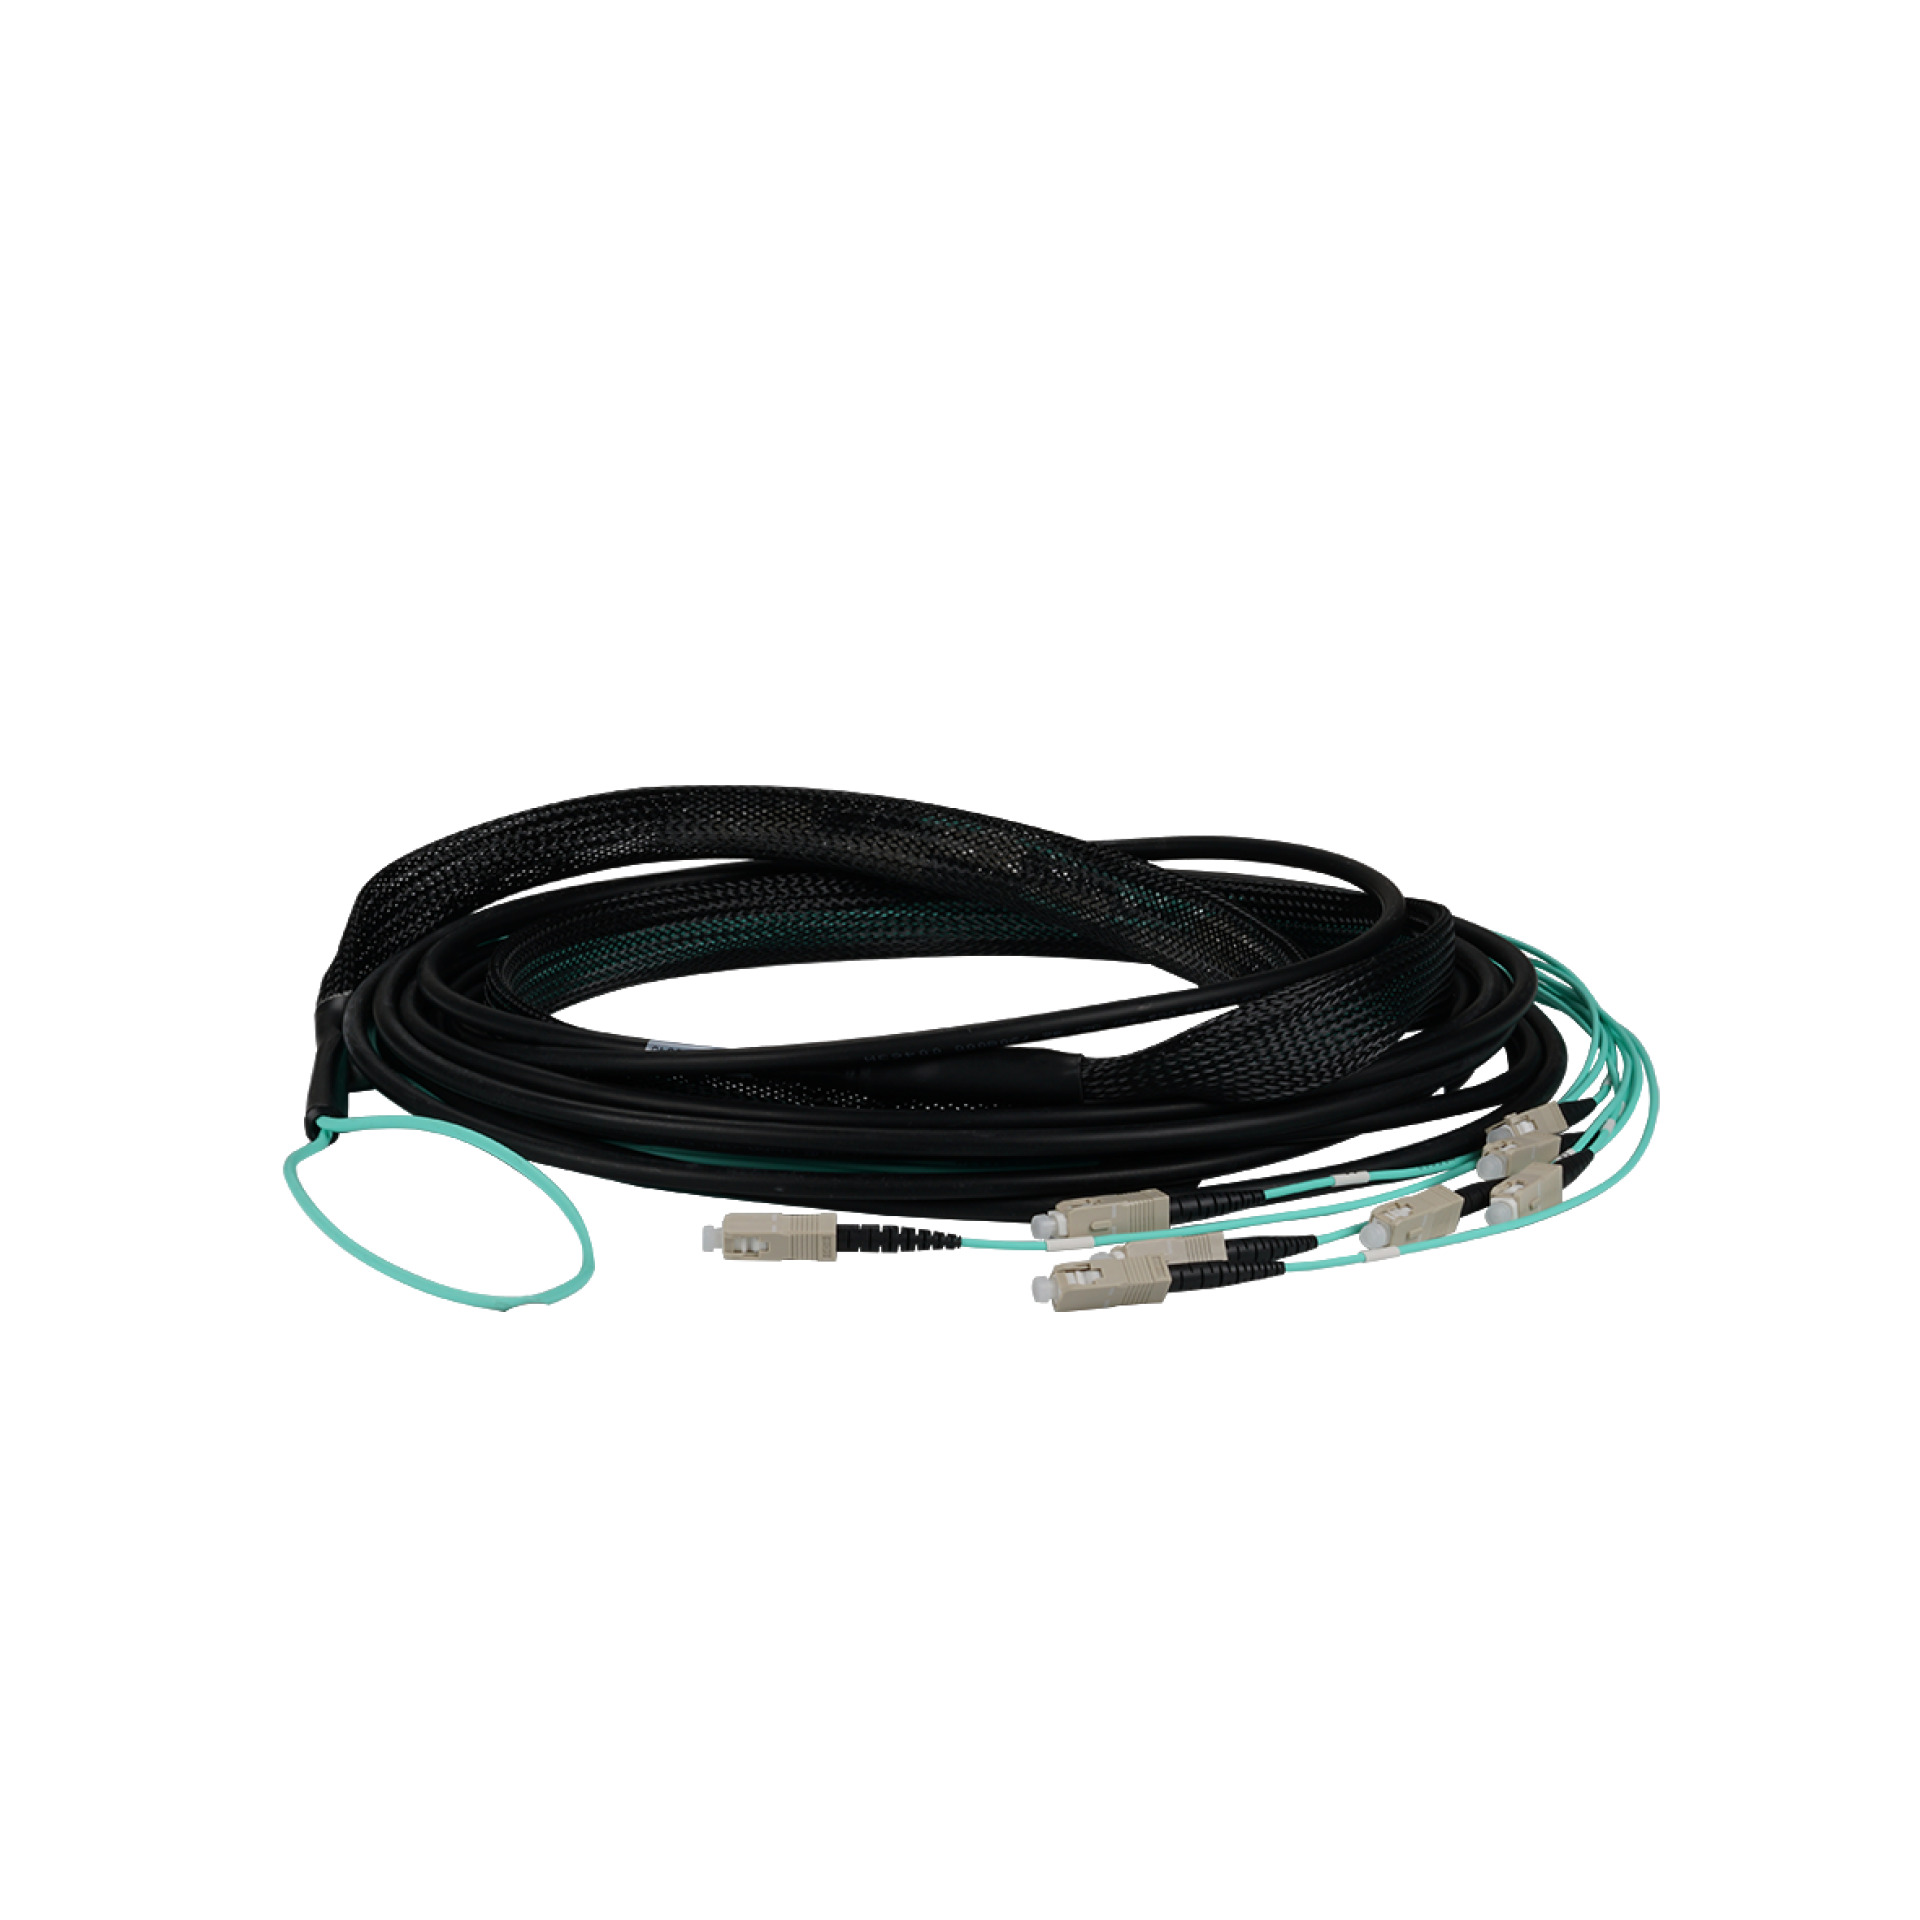 Trunkcable U-DQ(ZN)BH 8G 50/125, SC/SC OM3 200m